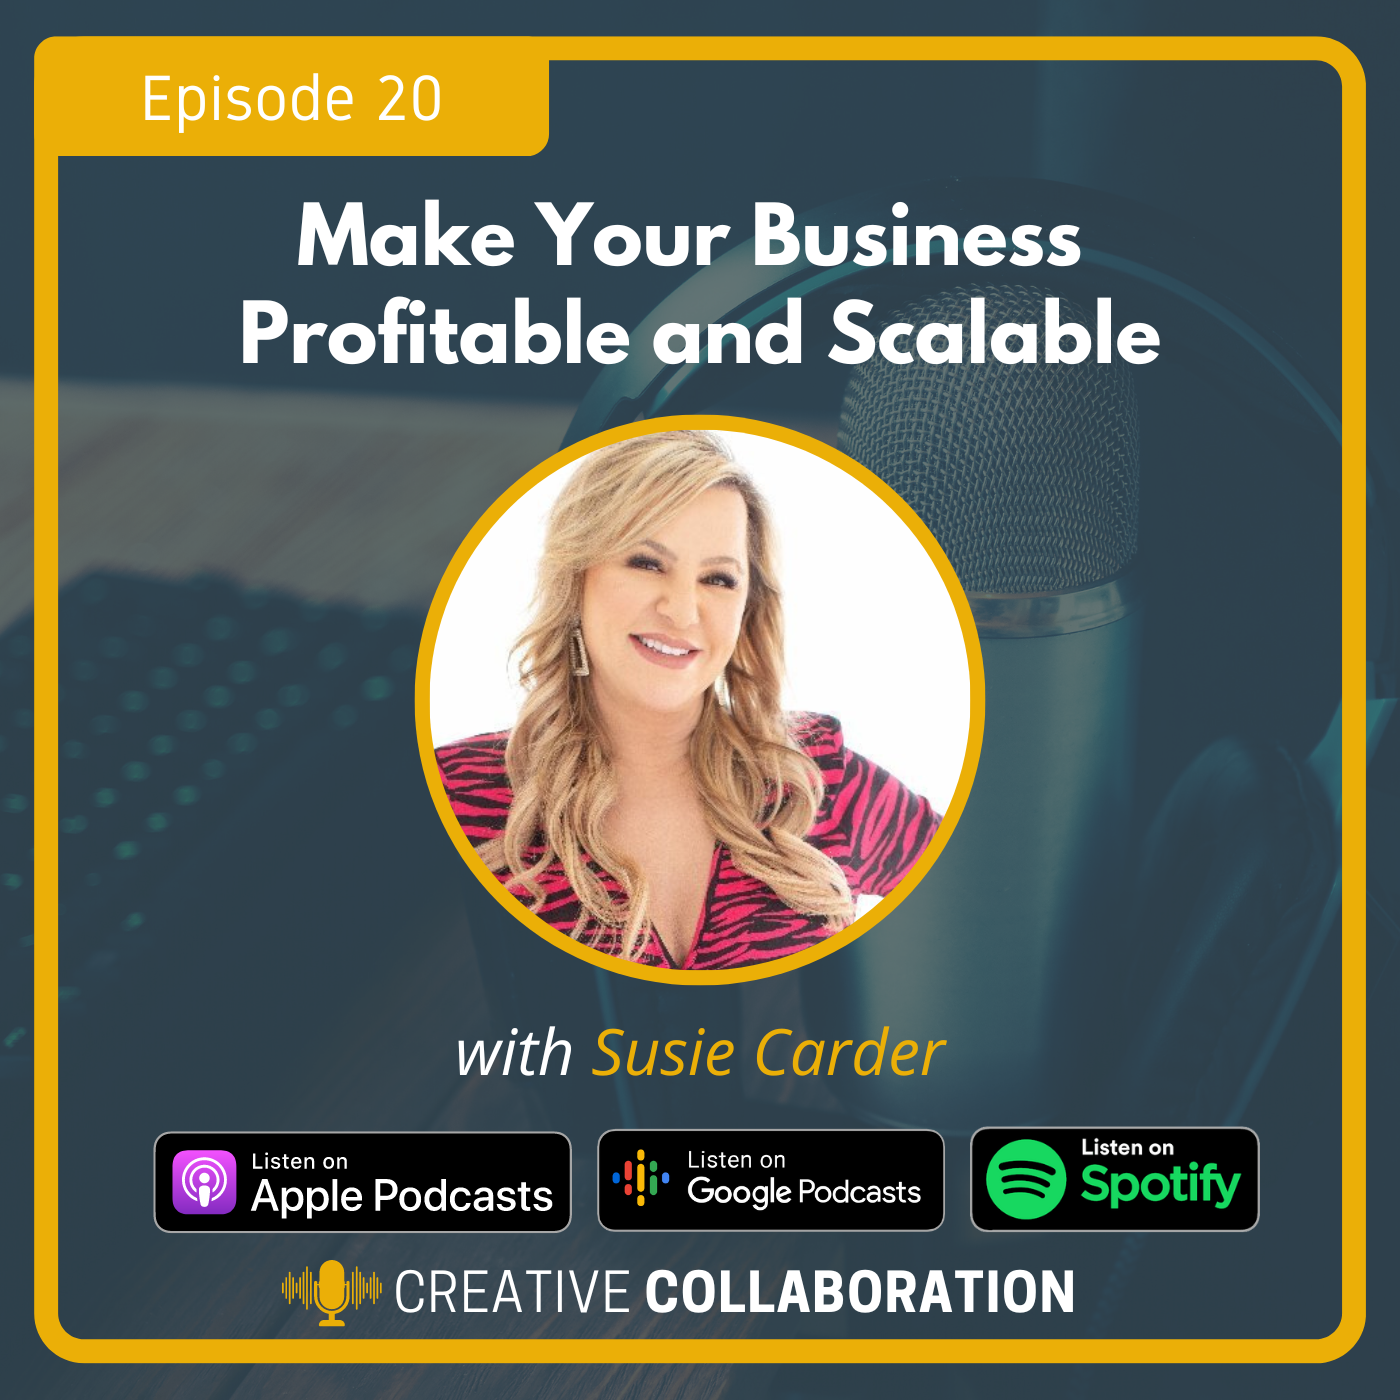 Make Your Business Profitable and Scalable with Susie Carder